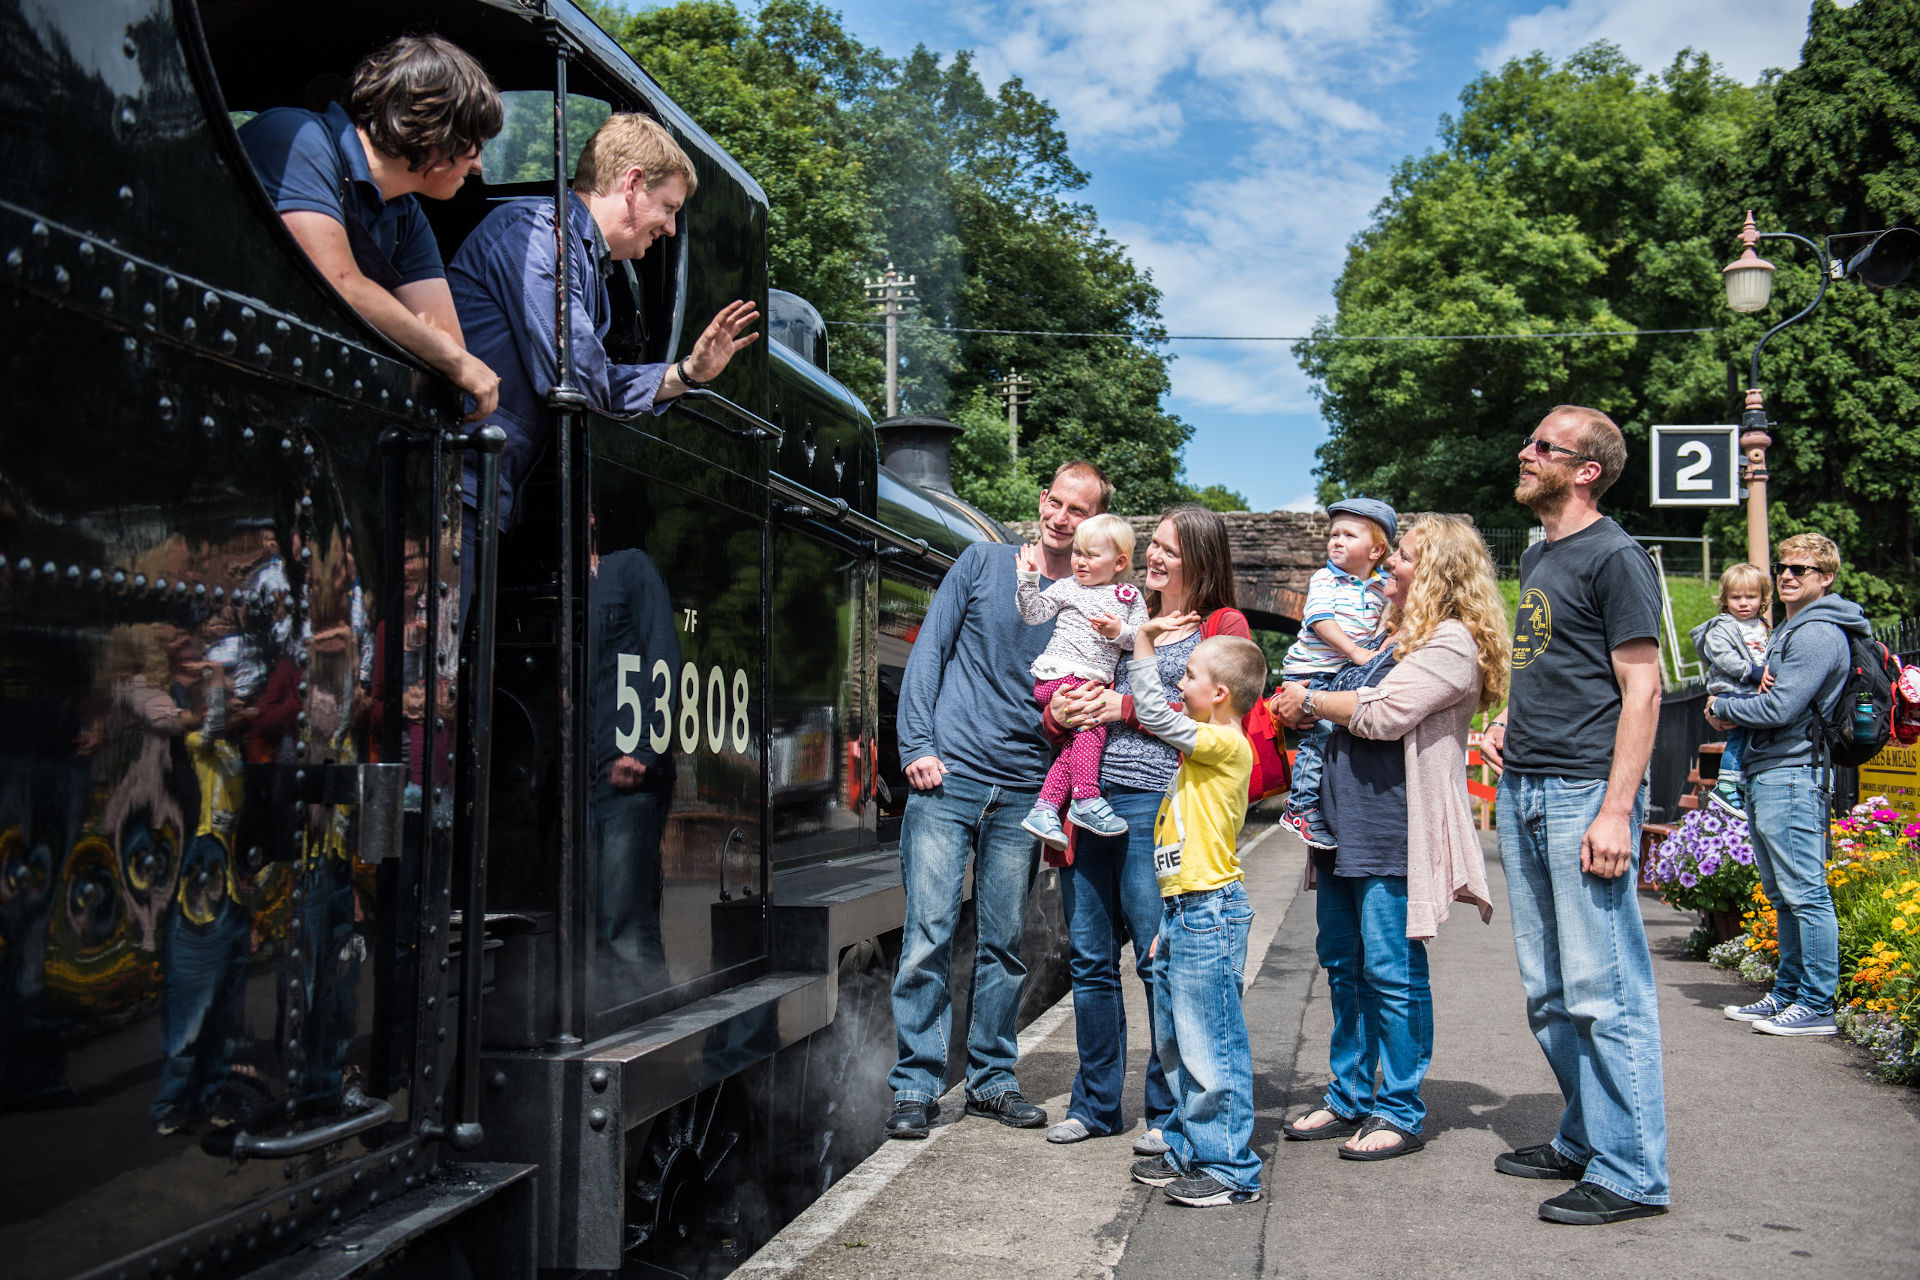 A family waves at the crew of a steam locomotive